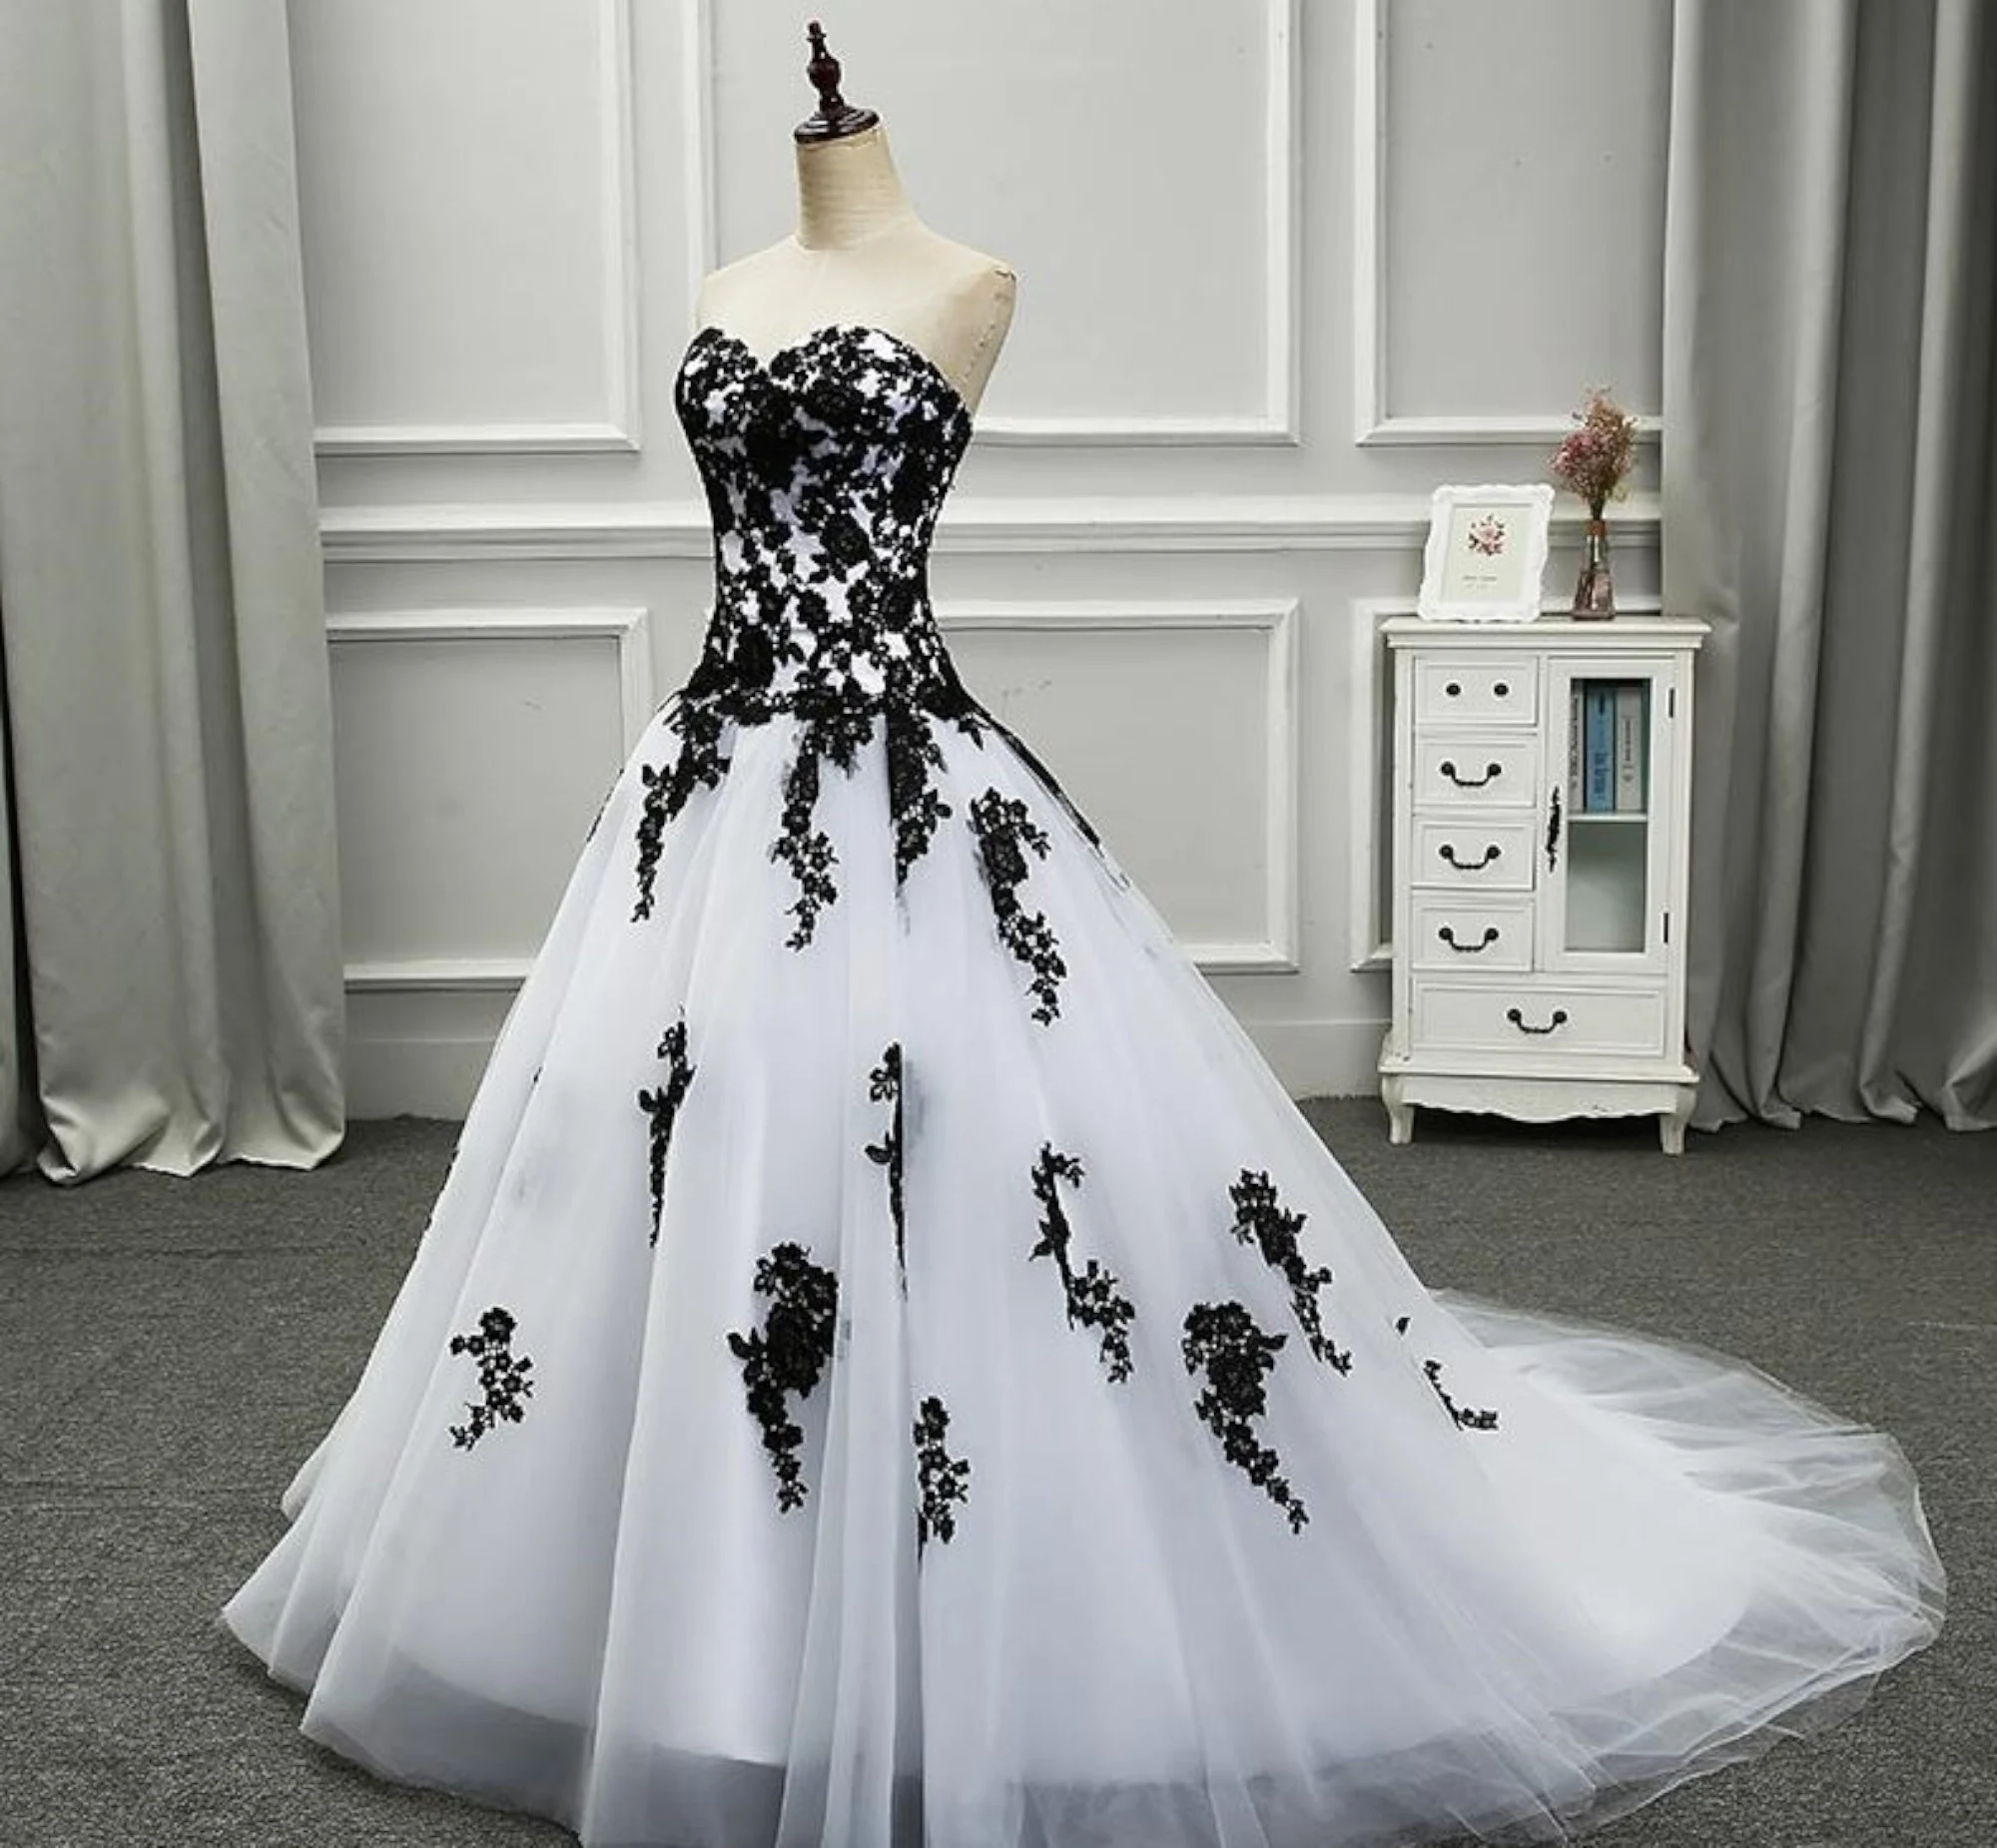 Timeless Elegance: Why Black and White Wedding Dresses Are Here to Stay